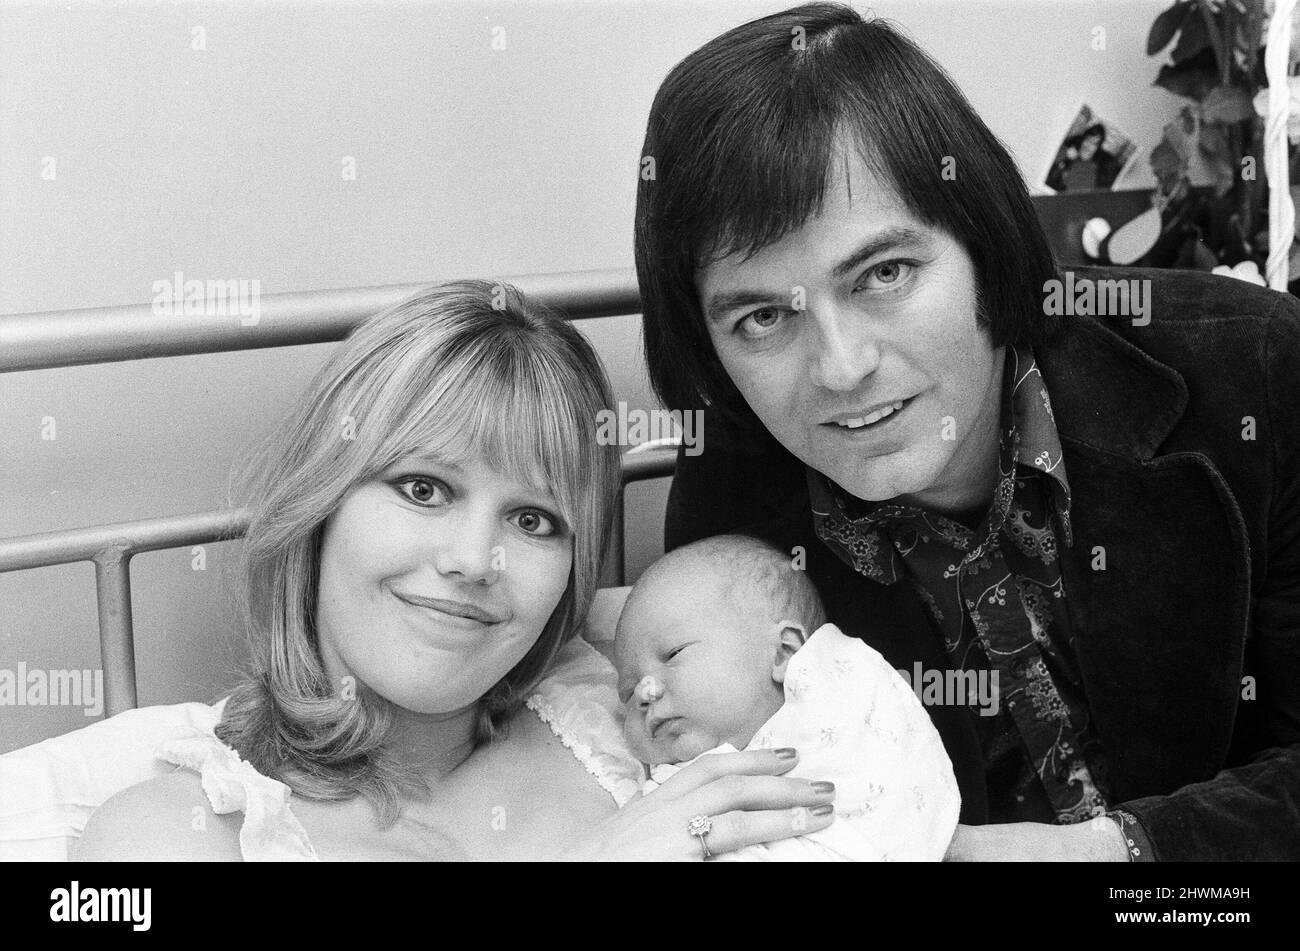 Tony Blackburn, Britain's top DJ, certainly became Top of the Pops when his wife Tessa Wyatt gave birth their first child, a alb 3oz boy who they have called Simon Anthony. Tony is pictured visiting his wife at St Charlotte's Hospital, Chiswick. 11th April 1973. Stock Photo